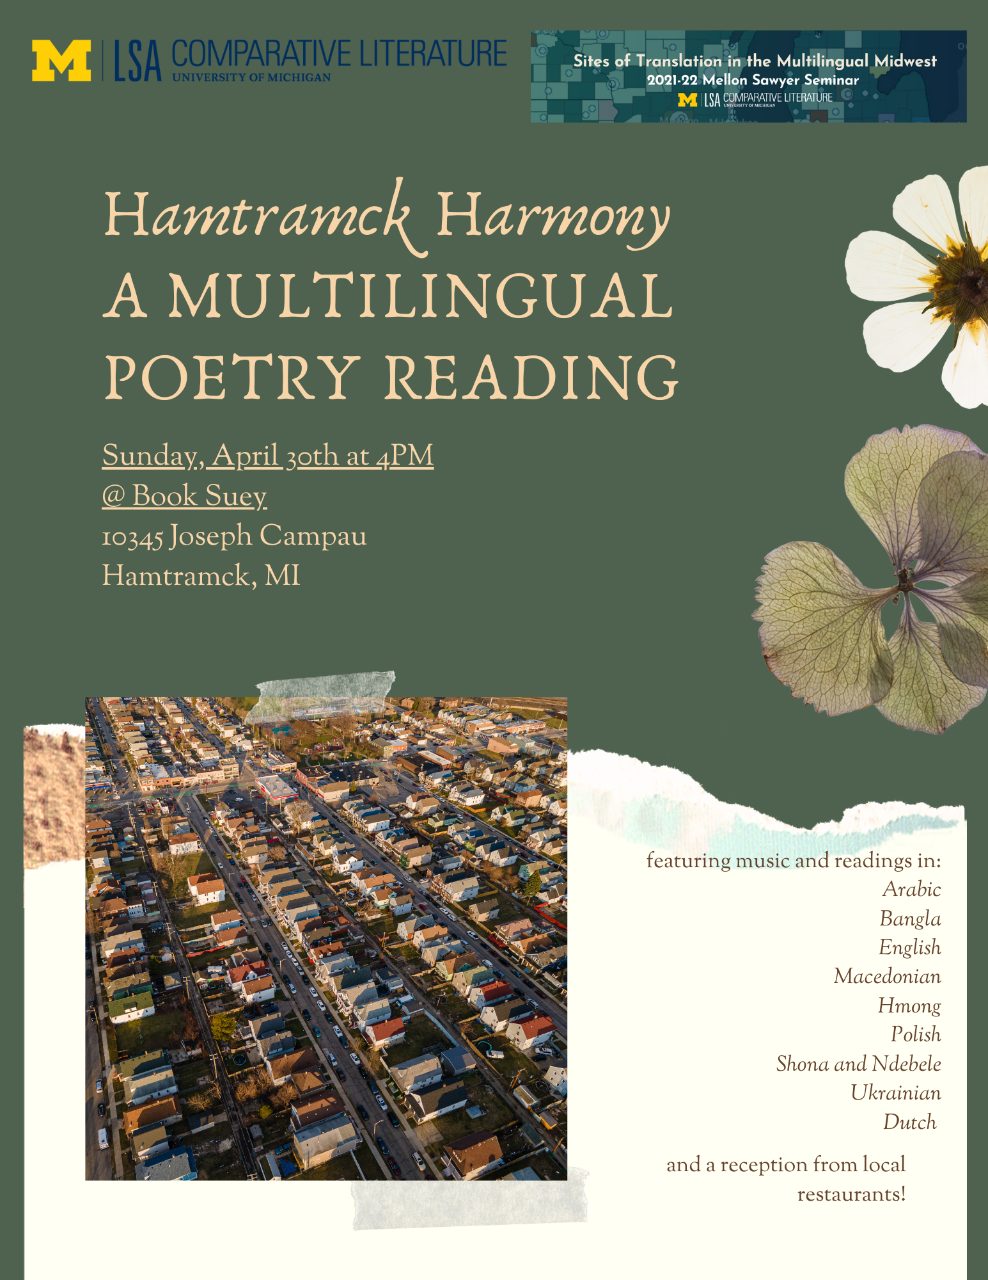 Text, “Hamtramck Harmony: a multilingual poetry reading Sunday, April 30th at 4PM at Book Suey, 10345 Joseph Campau, Hamtramck, MI. Featuring music and readings in Arabic, Bangla, English, Macedonian, Hmong, Polish, Shona and Ndebele, Ukrainian, Dutch, and a reception from local restaurants!”